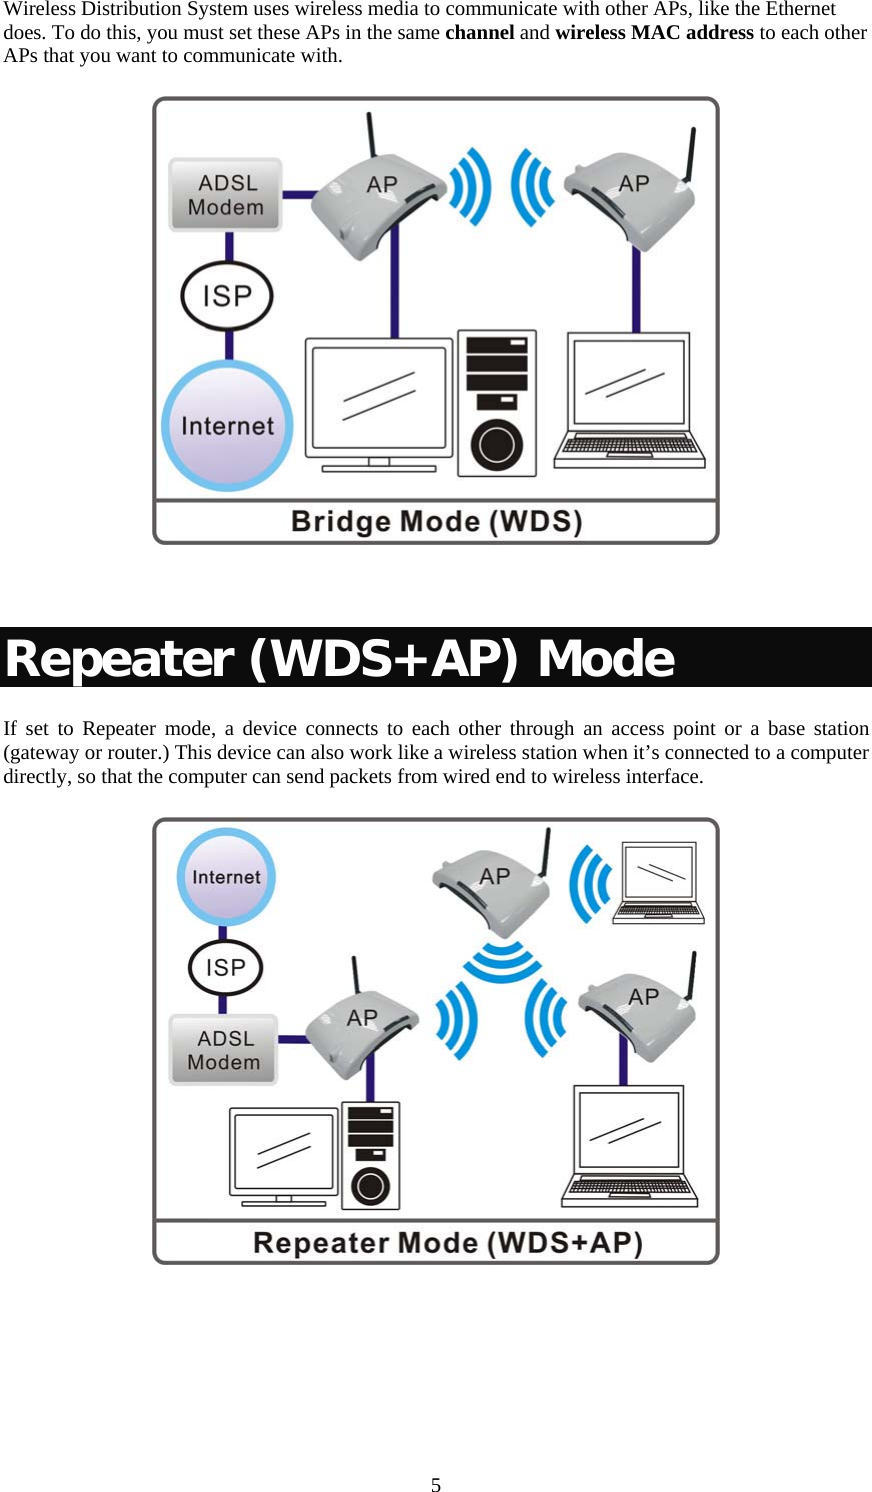   5Wireless Distribution System uses wireless media to communicate with other APs, like the Ethernet does. To do this, you must set these APs in the same channel and wireless MAC address to each other APs that you want to communicate with.    Repeater (WDS+AP) Mode If set to Repeater mode, a device connects to each other through an access point or a base station (gateway or router.) This device can also work like a wireless station when it’s connected to a computer directly, so that the computer can send packets from wired end to wireless interface.   